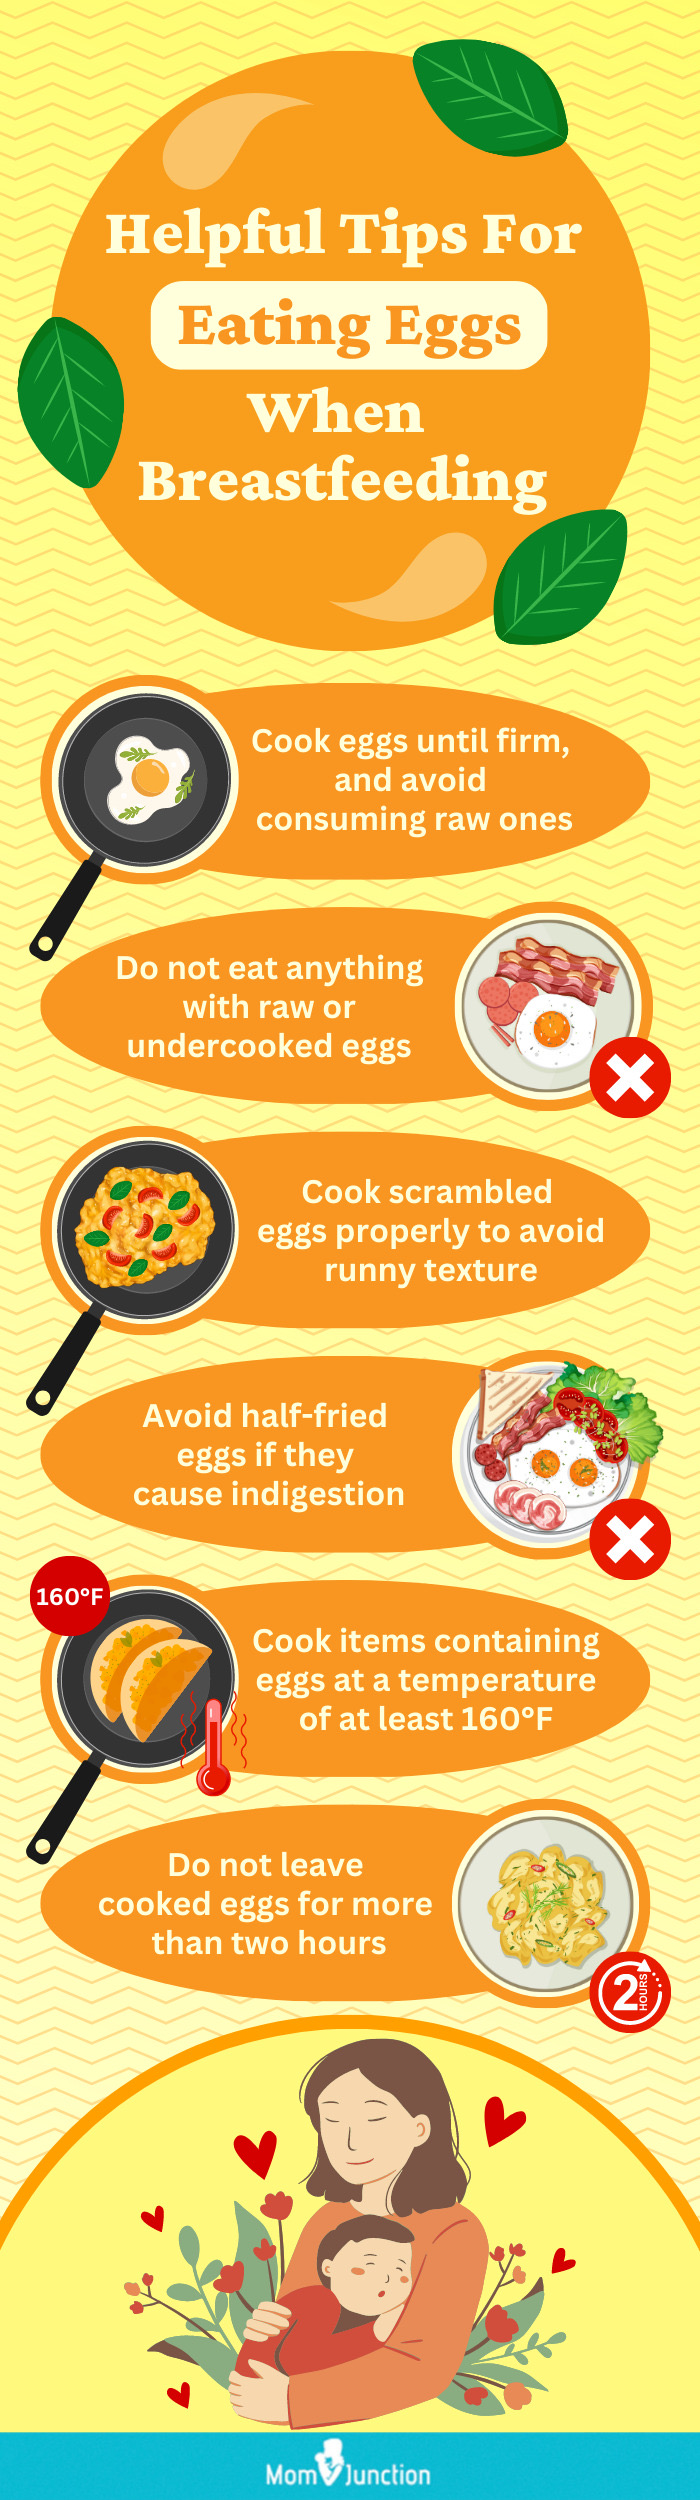 tips for eating eggs when breastfeeding (infographic)